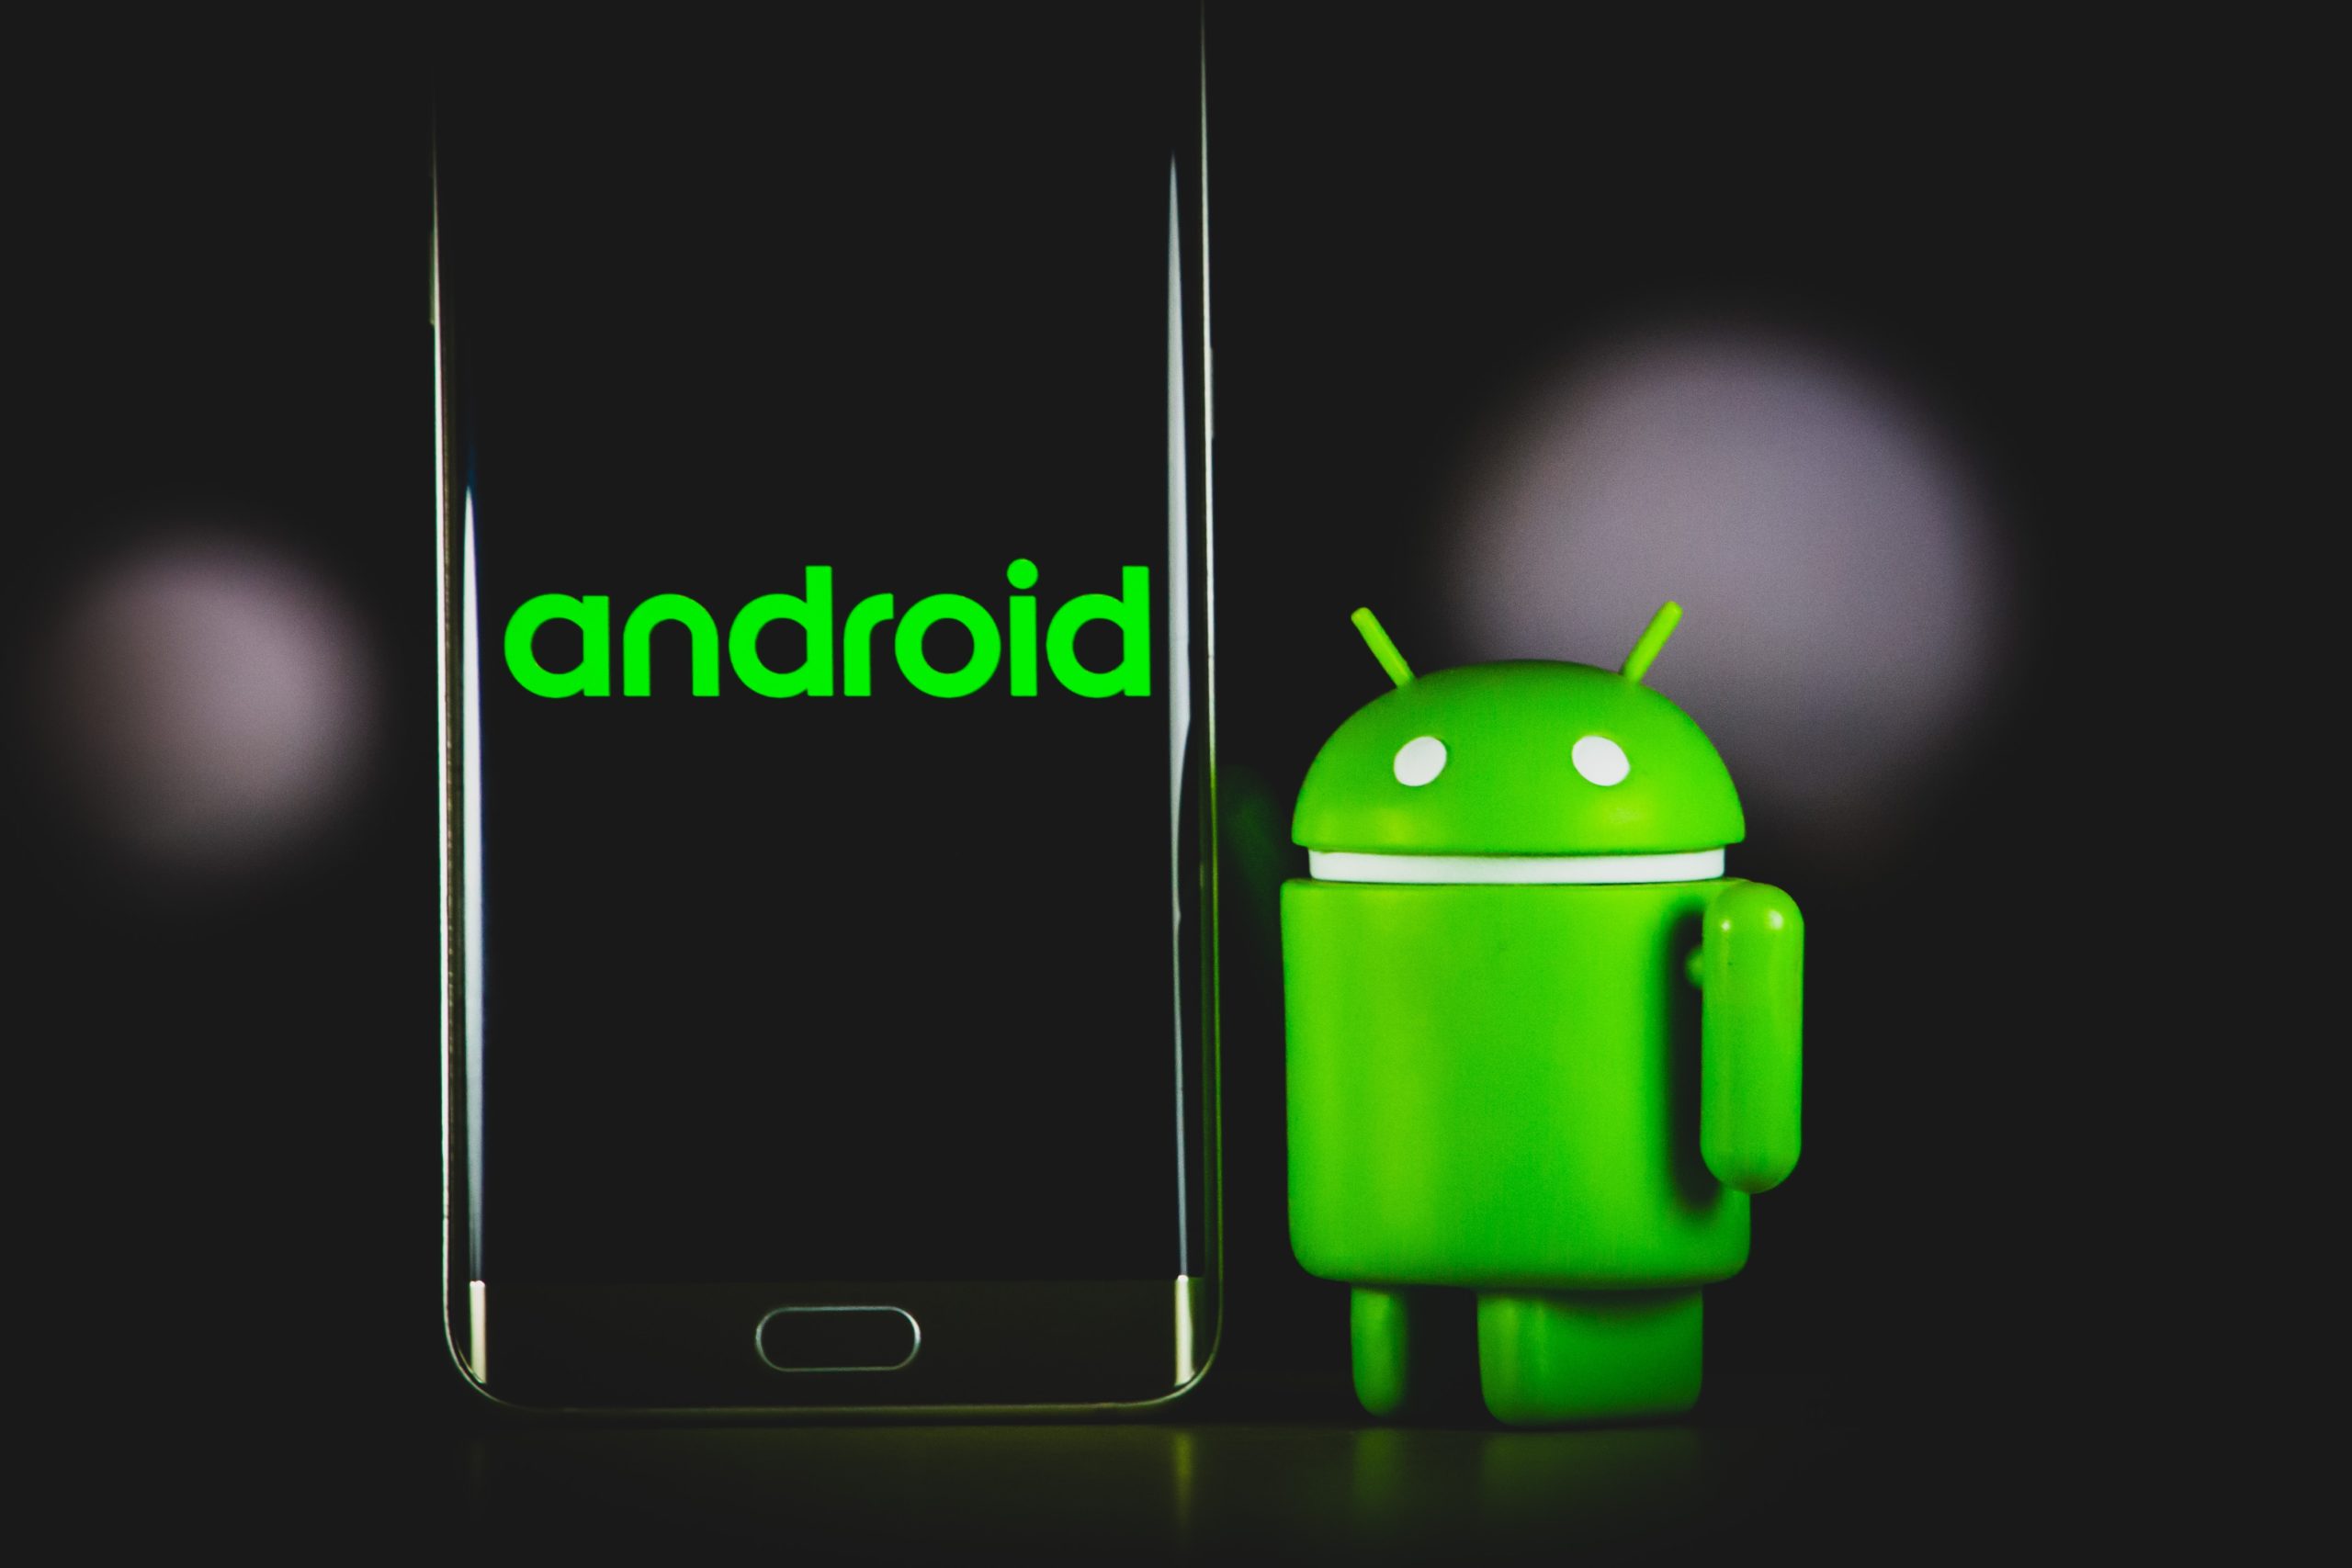 Advantages of Using Android Emulators for Mobile Game Development Mobile game development is a rapidly growing industry that requires developers to have access to the latest tools and technologies. Android emulators have become an essential tool for game developers to create, test, and debug online gaming technology without the need for physical devices. In this article, we will explore the 10 advantages of using Android emulators for mobile game development. Cost-effective One of the most significant advantages of using an Android emulator is cost-effectiveness. Game developers can save money on hardware and software, as emulators are free to use. This means that developers can develop their games without incurring additional expenses, which is a significant advantage, especially for indie developers. Additionally, emulators don't require any physical space, so developers don't have to worry about having enough room to store multiple devices. https://images.unsplash.com/photo-1607252650355-f7fd0460ccdb?ixlib=rb-4.0.3&ixid=MnwxMjA3fDB8MHxzZWFyY2h8Mnx8YW5kcm9pZHxlbnwwfHwwfHw%3D&auto=format&fit=crop&w=400&q=60 Easy to use Another advantage of using Android emulators is that they are simple and easy to set up. Developers can get started quickly without any extra effort. With the intuitive user interface and simple installation process, it's easy to navigate the emulator, even for novice developers. Emulators also provide a standardized environment, which makes it easier for developers to work with their team and collaborate on their project. Testing Android emulators enable developers to test their games on a wide range of virtual devices with different configurations and specifications. This means that developers can test their games thoroughly without having to own the actual physical devices, which is an advantage in terms of time and cost. Developers can test their games on different operating systems, screen sizes, and resolutions, which helps to ensure that their games are optimized for a broad audience. Accessibility Android emulators are available on different platforms like Windows, Linux, and Mac OS. This means that developers can develop their games without any hardware limitations. The accessibility of emulators makes it easier for developers to create games that cater to a broad audience. This advantage also makes it easier for developers to work remotely and collaborate with team members who are not physically present. https://images.unsplash.com/photo-1569721983011-6c8d6732d384?ixlib=rb-4.0.3&ixid=MnwxMjA3fDB8MHxzZWFyY2h8MXx8YW5kcm9pZCUyMGVtdWxhdG9yfGVufDB8fDB8fA%3D%3D&auto=format&fit=crop&w=400&q=60 Real-time debugging One of the most significant advantages of using an emulator is real-time debugging. Developers can easily debug their games in real-time and make changes on the go without having to build and deploy their games every time. This speeds up the debugging process and helps developers catch and fix issues quickly. Emulators also provide tools for developers to track down and fix performance issues, which can be challenging to identify on physical devices. Speed Emulators can run at higher speeds than physical devices, making it easier to test and debug games. This advantage helps developers save time and work more efficiently. It's also essential to note that emulator speeds are configurable, enabling developers to adjust the speed based on their needs. This feature is especially useful for developers who are testing games that require high processing power and memory. https://images.unsplash.com/photo-1498050108023-c5249f4df085?ixlib=rb-4.0.3&ixid=MnwxMjA3fDB8MHxzZWFyY2h8M3x8YXBwJTIwY29kaW5nfGVufDB8fDB8fA%3D%3D&auto=format&fit=crop&w=400&q=60 Flexibility Android emulators offer flexibility that physical devices cannot match. Developers can create virtual devices with different screen sizes, resolutions, and operating system versions to test their game on different devices. This flexibility enables developers to create games that cater to a broad audience. Emulators also let developer simulate different network conditions, which helps to ensure that their games are optimized for different network speeds and connectivity types. Integration with development tools Android emulators integrate seamlessly with popular development tools such as Android Studio, making it easier for developers to test and debug their games. This advantage means that developers can work with their preferred tools and not have to switch to another toolset. Emulators also enable developers to use third-party tools like game engines, which can further enhance their development process. No need for physical devices Developers don't need to own a range of physical devices to test their games. With Android emulators, developers can create virtual devices with different specifications and configurations to test their games thoroughly. This advantage means that developers don't have to spend money on expensive devices and can test their games on a wide range of virtual devices. Improved workflow Lastly, Android emulators help to improve the workflow of game developers. Developers can test and debug their games quickly and efficiently, which helps to speed up the development process. Emulators also provide a standardized environment, making it easier for developers to collaborate and work with their team members. This improved workflow can help developers to deliver high-quality games faster and more efficiently. Conclusion In conclusion, Android emulators are an essential tool for mobile game development. They offer several advantages, including cost-effectiveness, ease of use, accessibility, testing capabilities, real-time debugging, speed, flexibility, integration with development tools, no need for physical devices, and improved workflow. Game developers who utilize Android emulators can create high-quality games faster and more efficiently, making them a valuable addition to any game development project. 